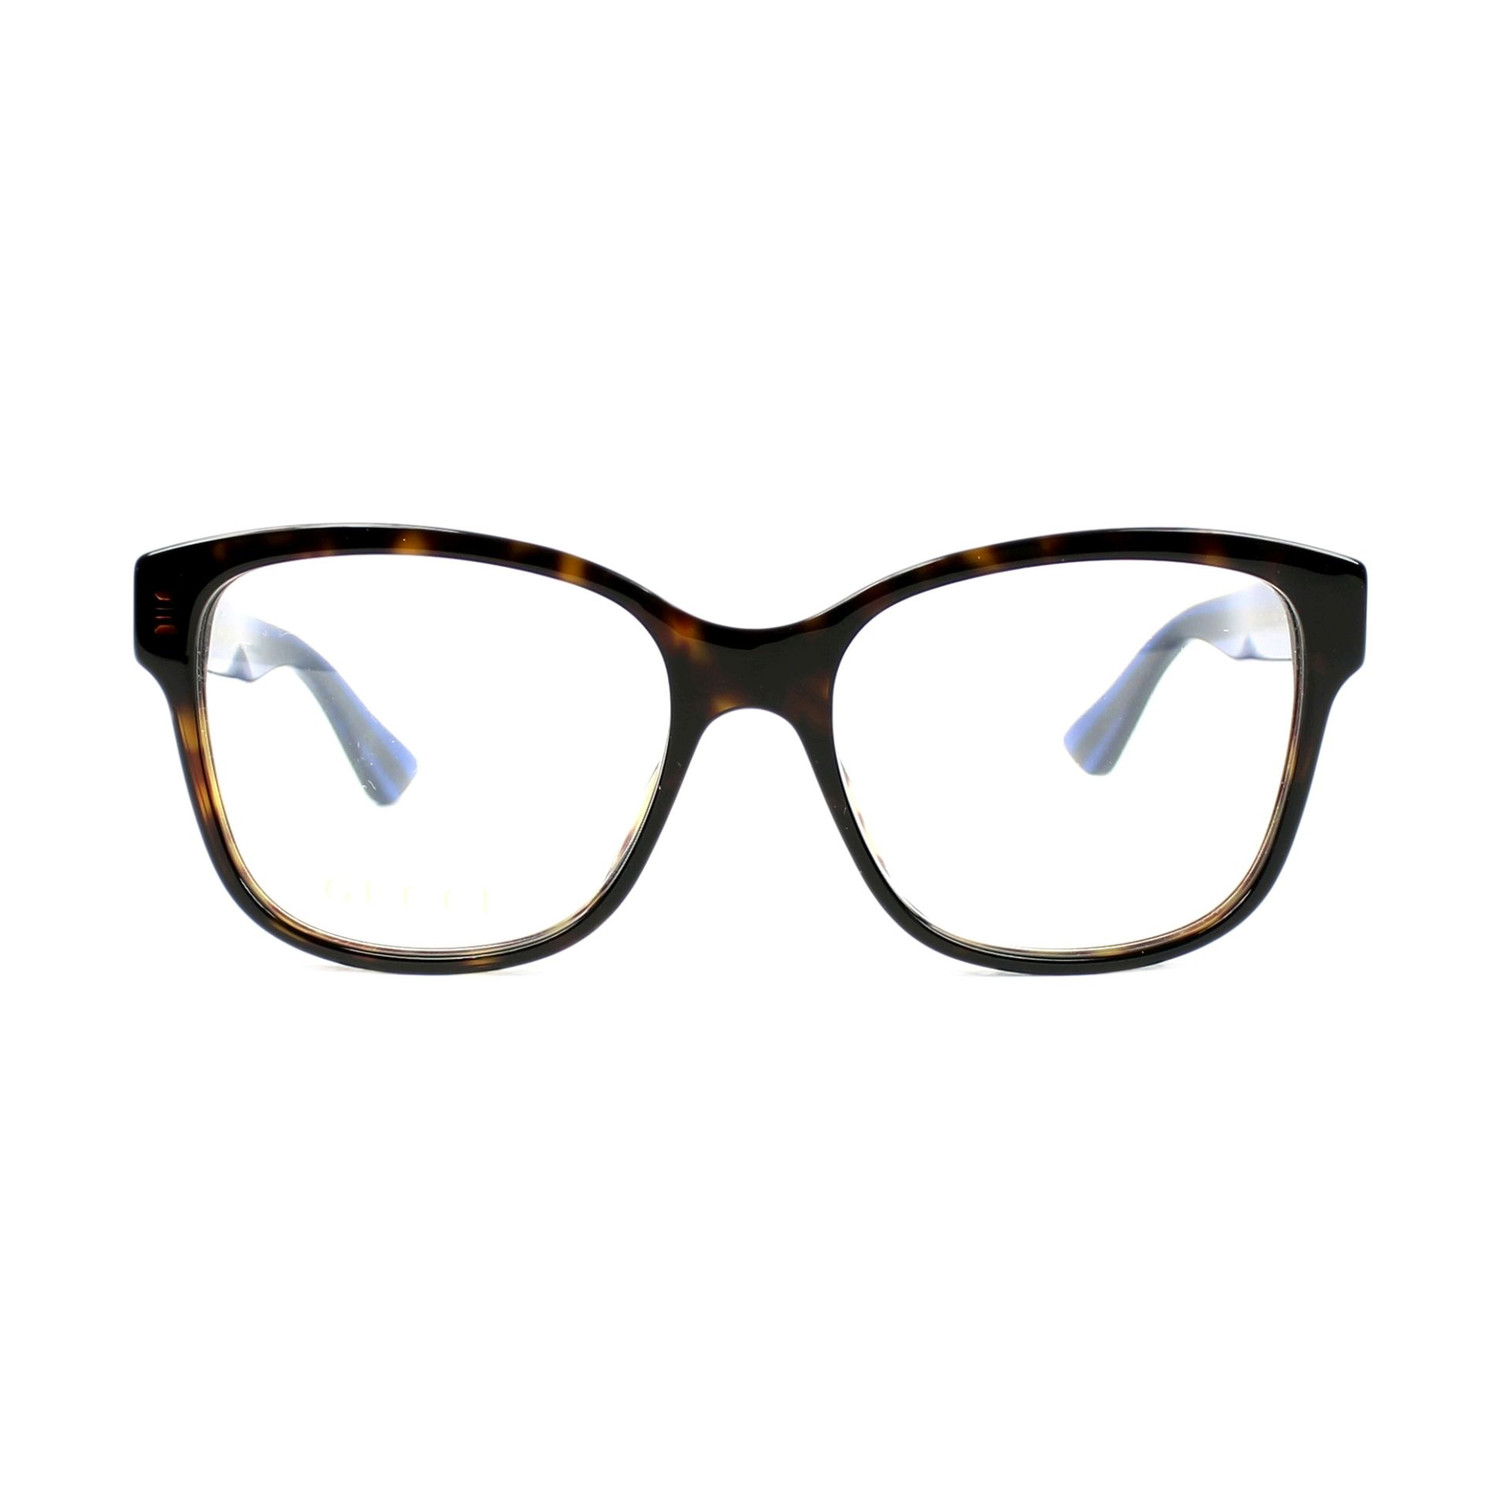 GG0038O-003-54 Optical Frames // Havana + Blue + Red - Gucci - Touch of ...